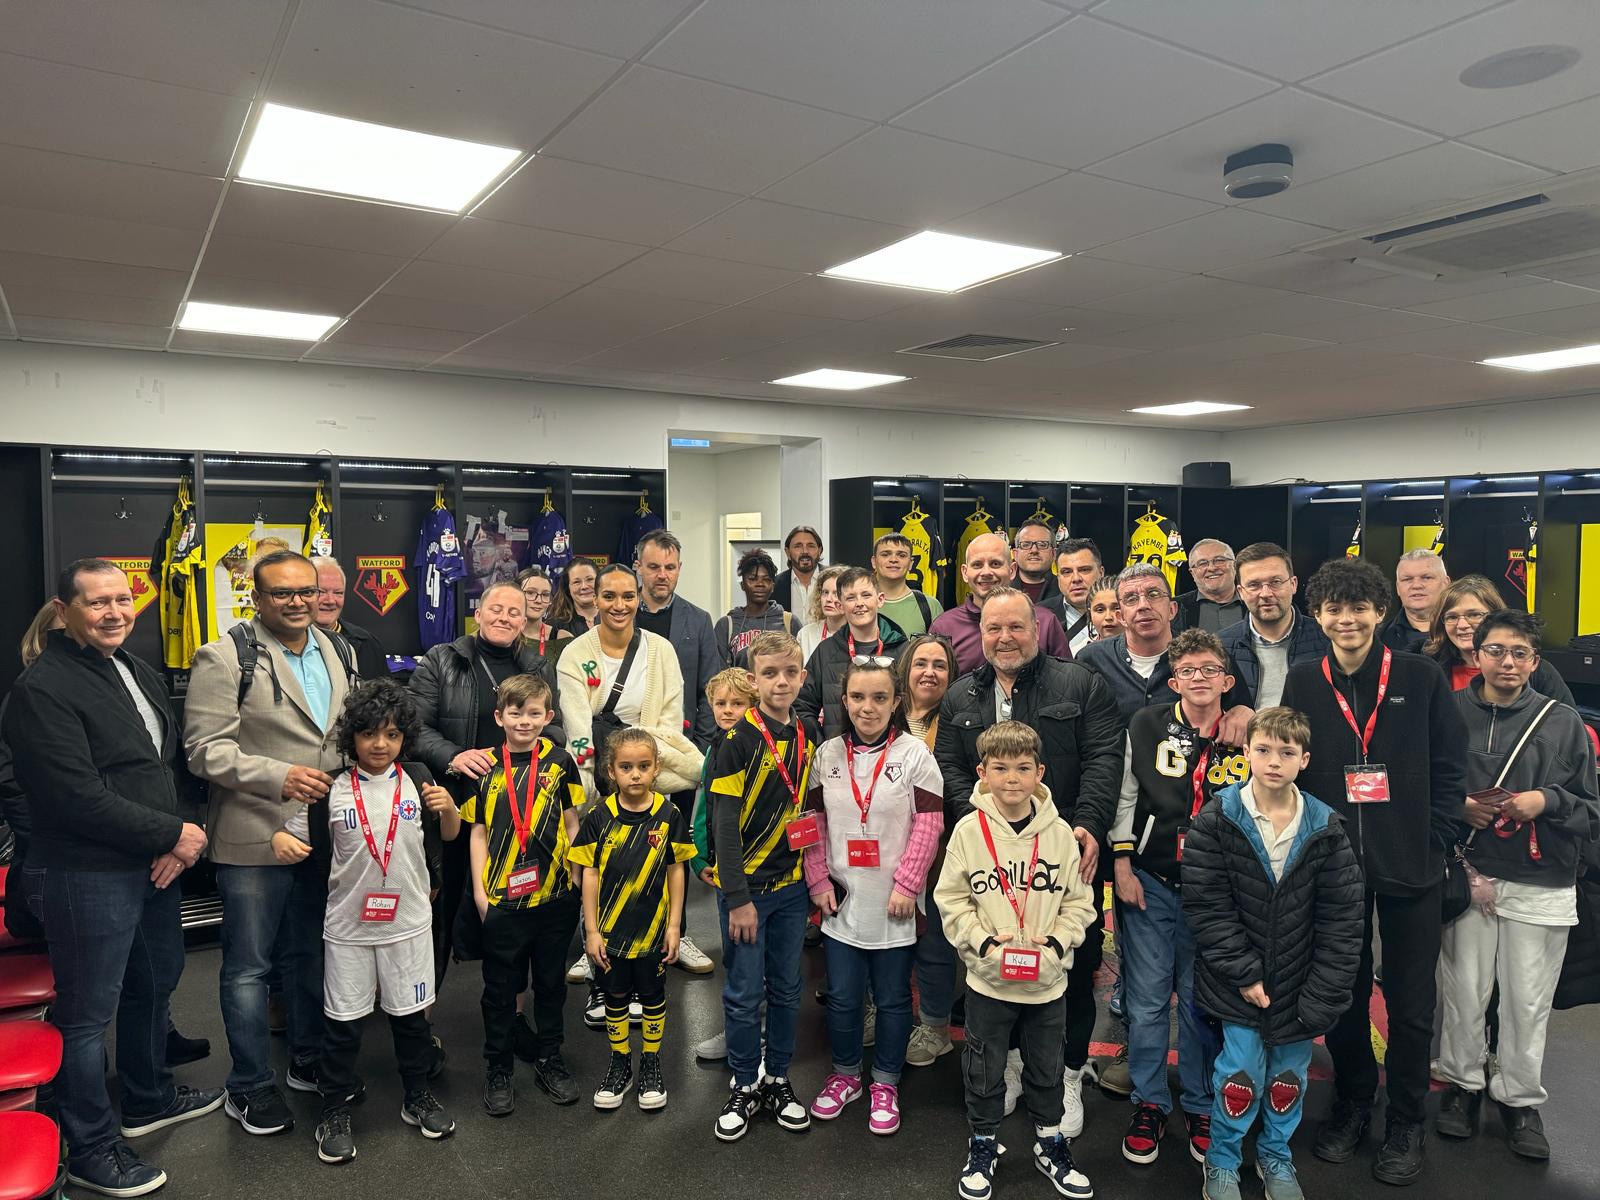 Alan Day Motor Group VIP day experience at Watford FC for disabled youngsters